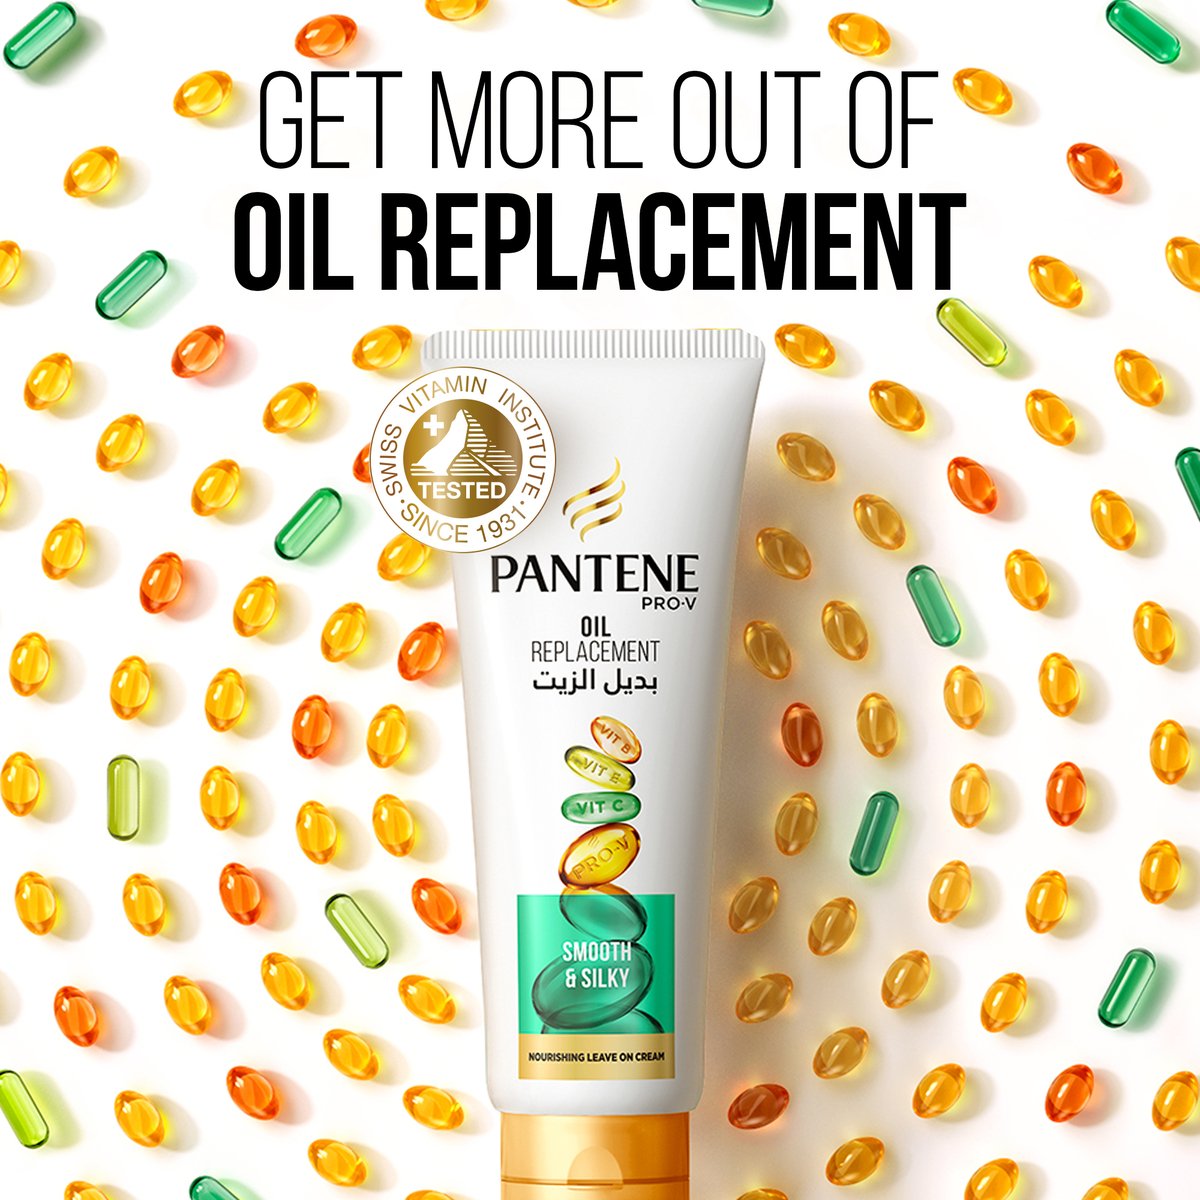 Pantene Pro-V Hair Oil Replacement Smooth & Silky, 275 ml